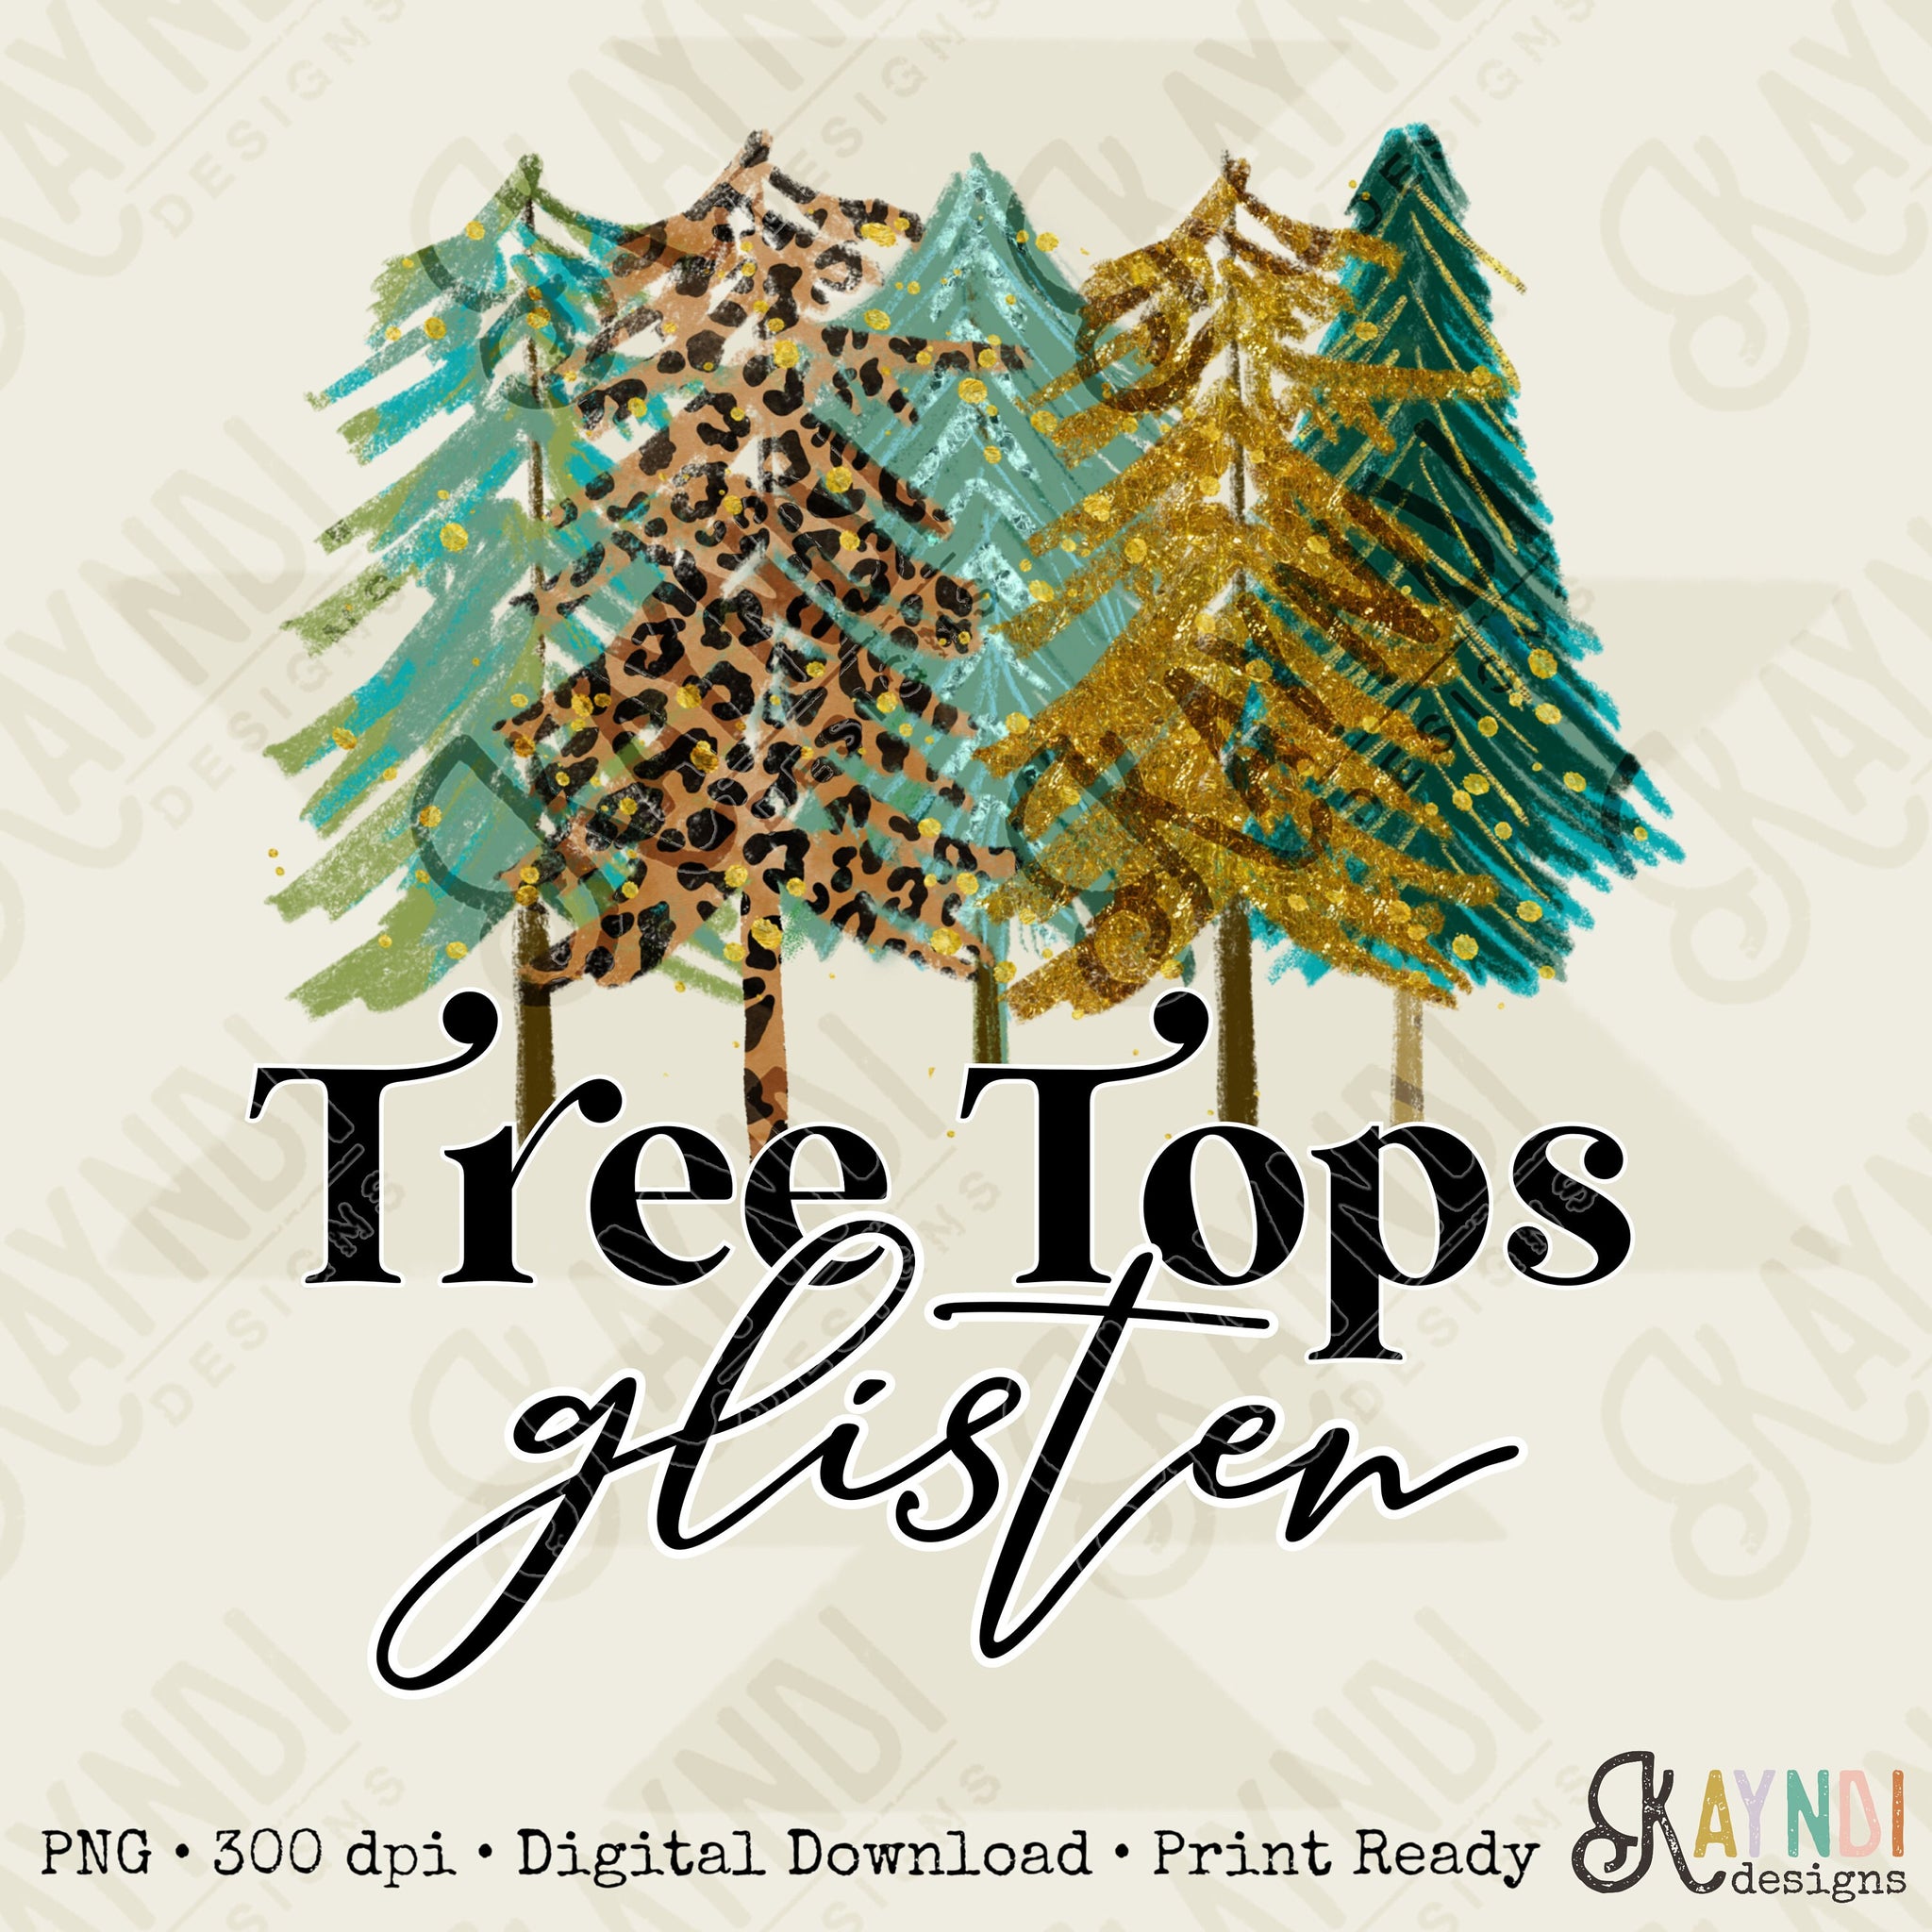 Tree Tops Glisten Sublimation Design PNG Digital Download Printable Christmas Winter Leopard Cheetah Christmas Tree Trees